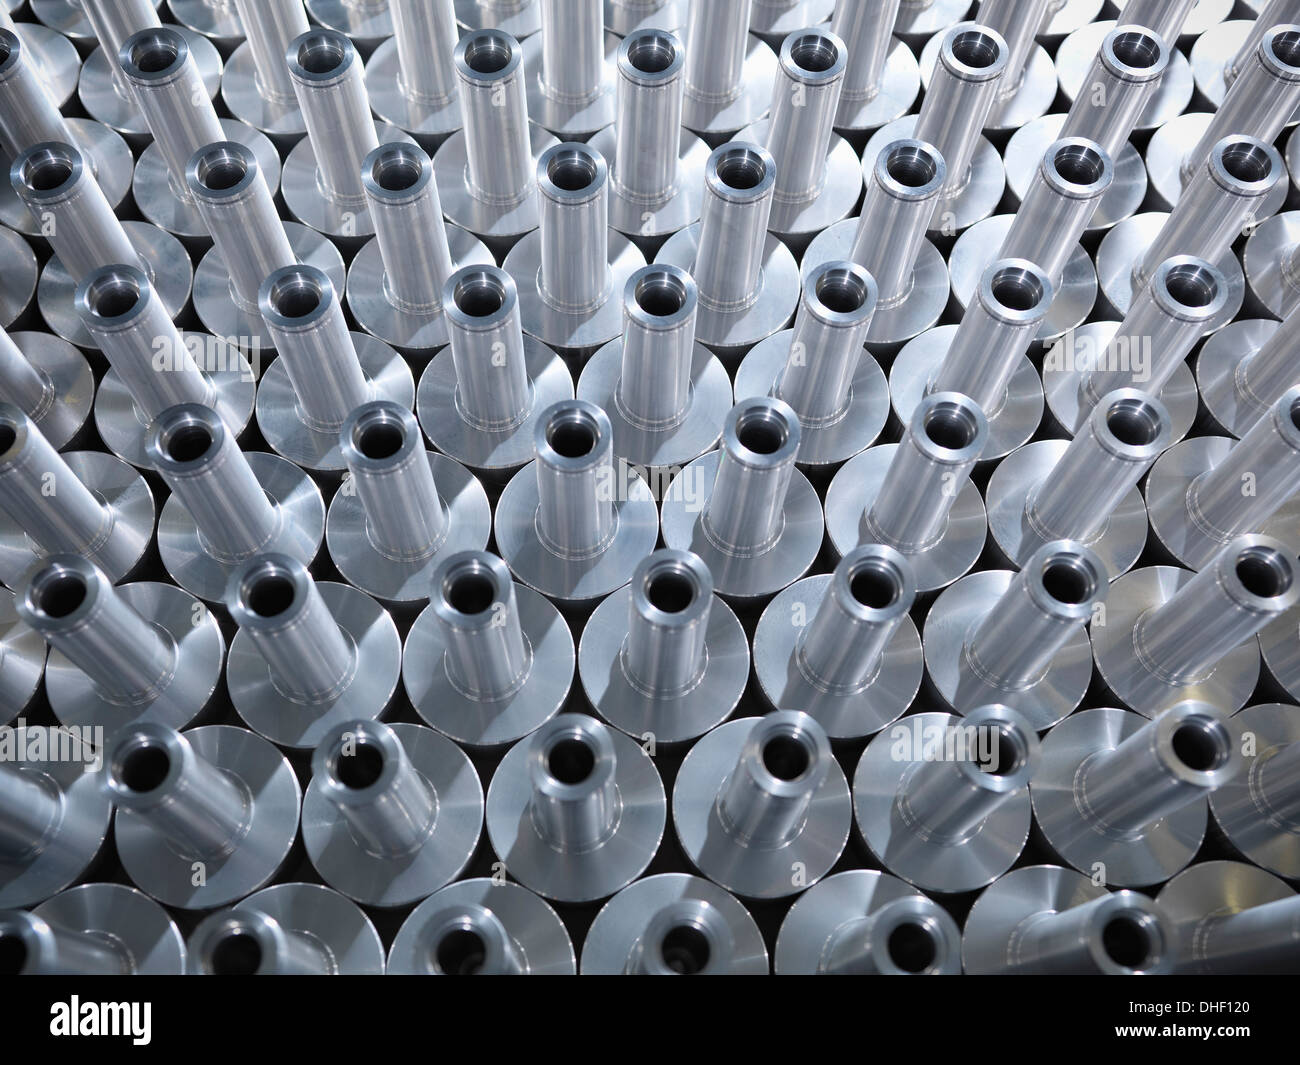 Large group of engineered parts in factory, full frame Stock Photo